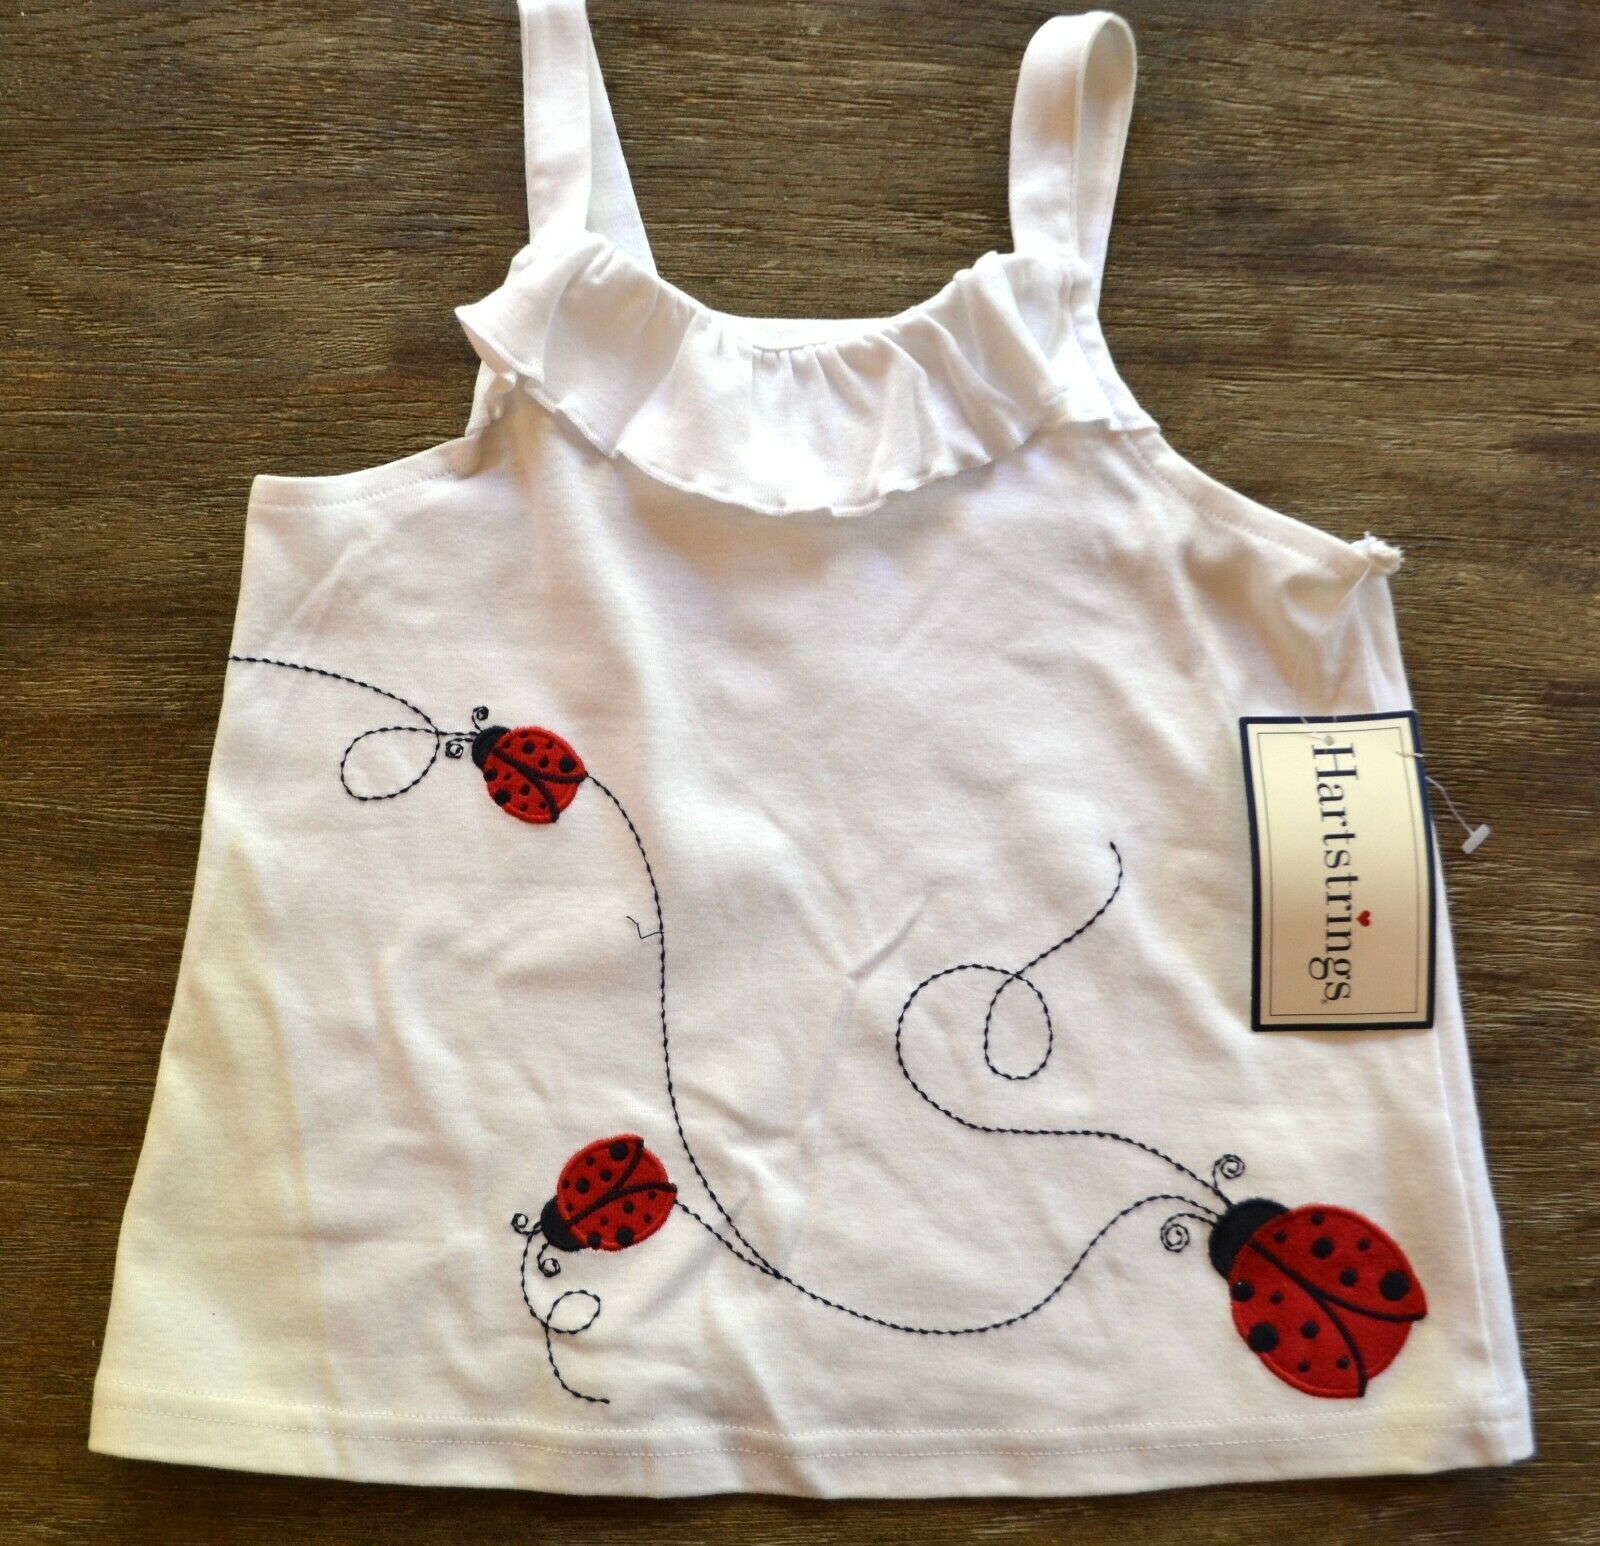 Hartstrings Girls White Embroidered Ladybug Cotton Tank Top, Size 6 - $32.99